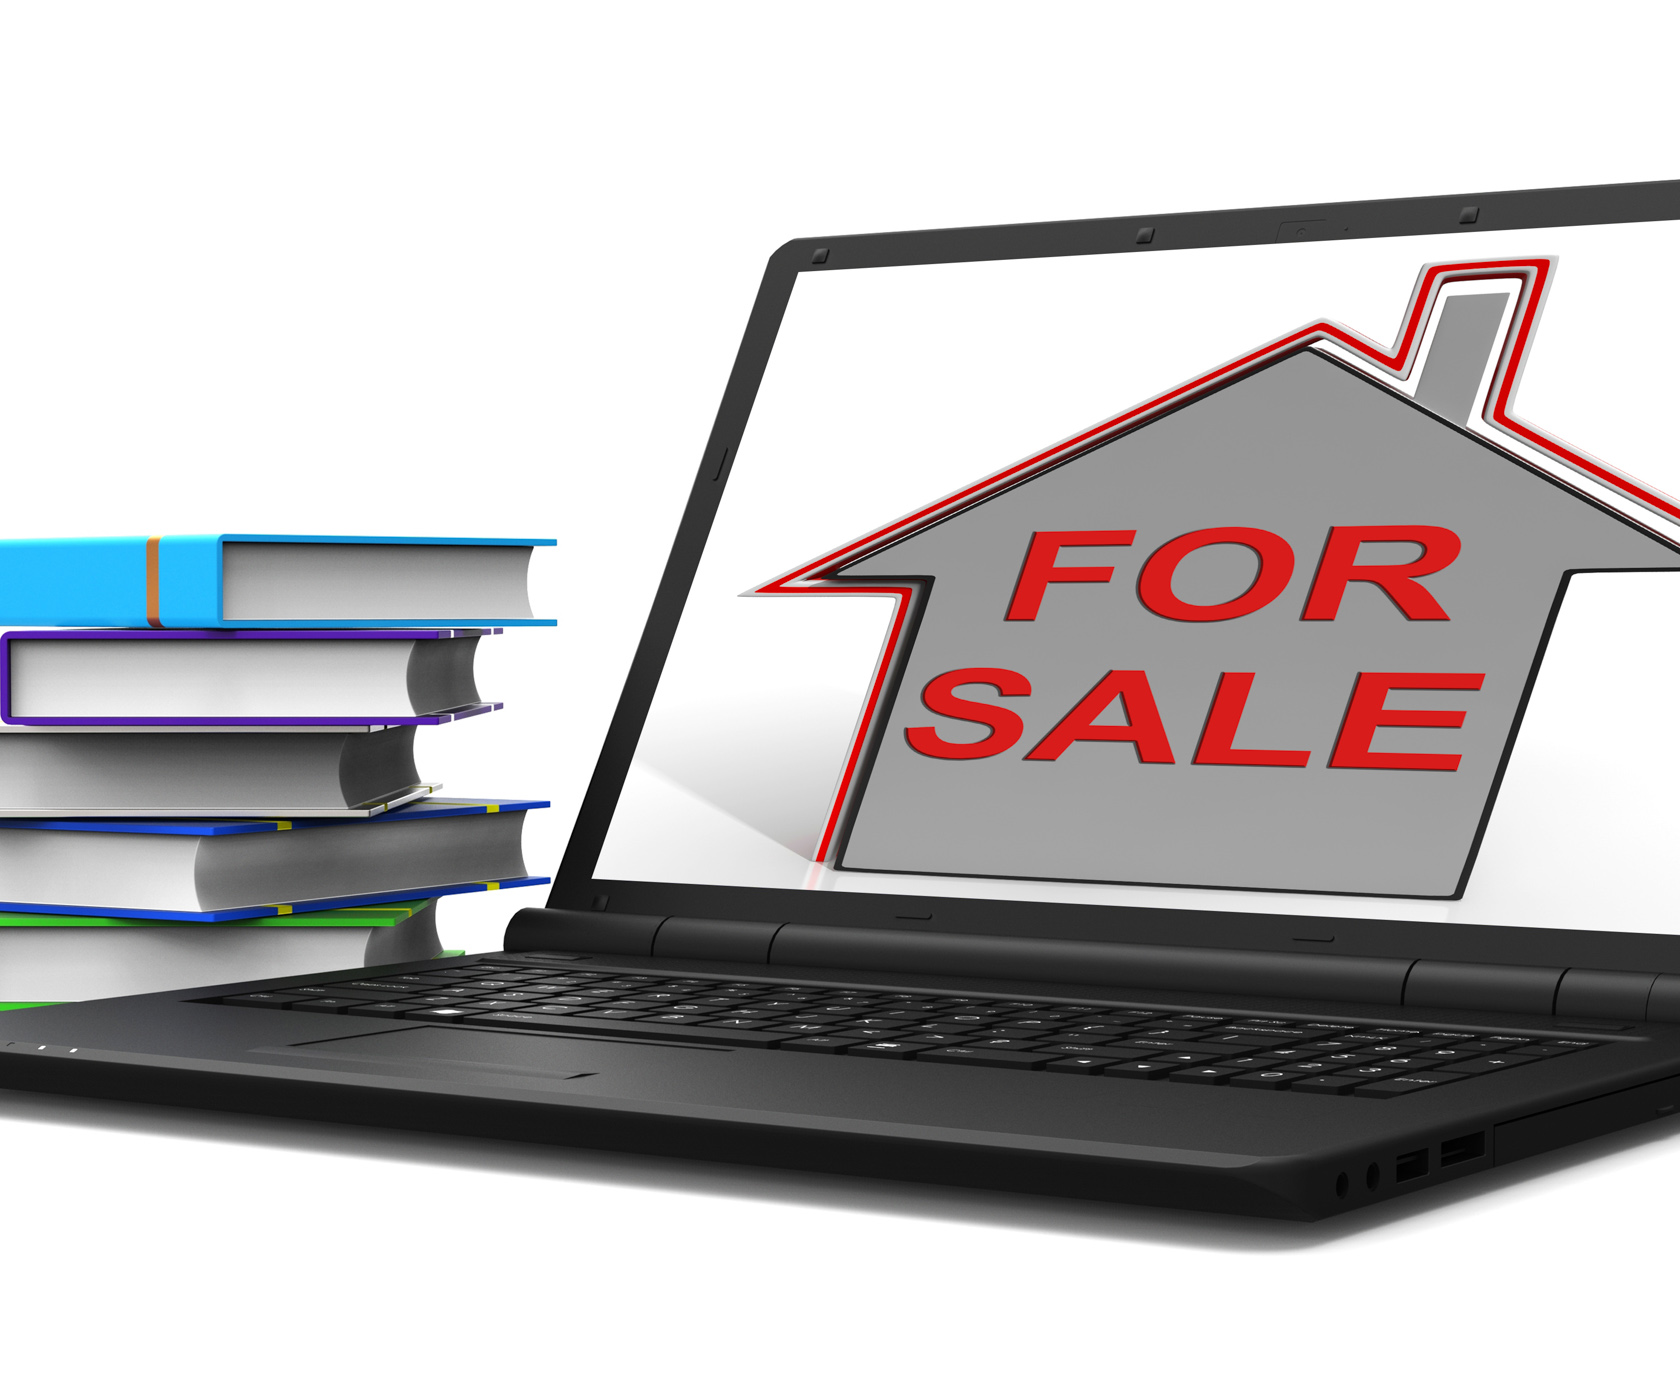 For sale house laptop means selling real estate photo